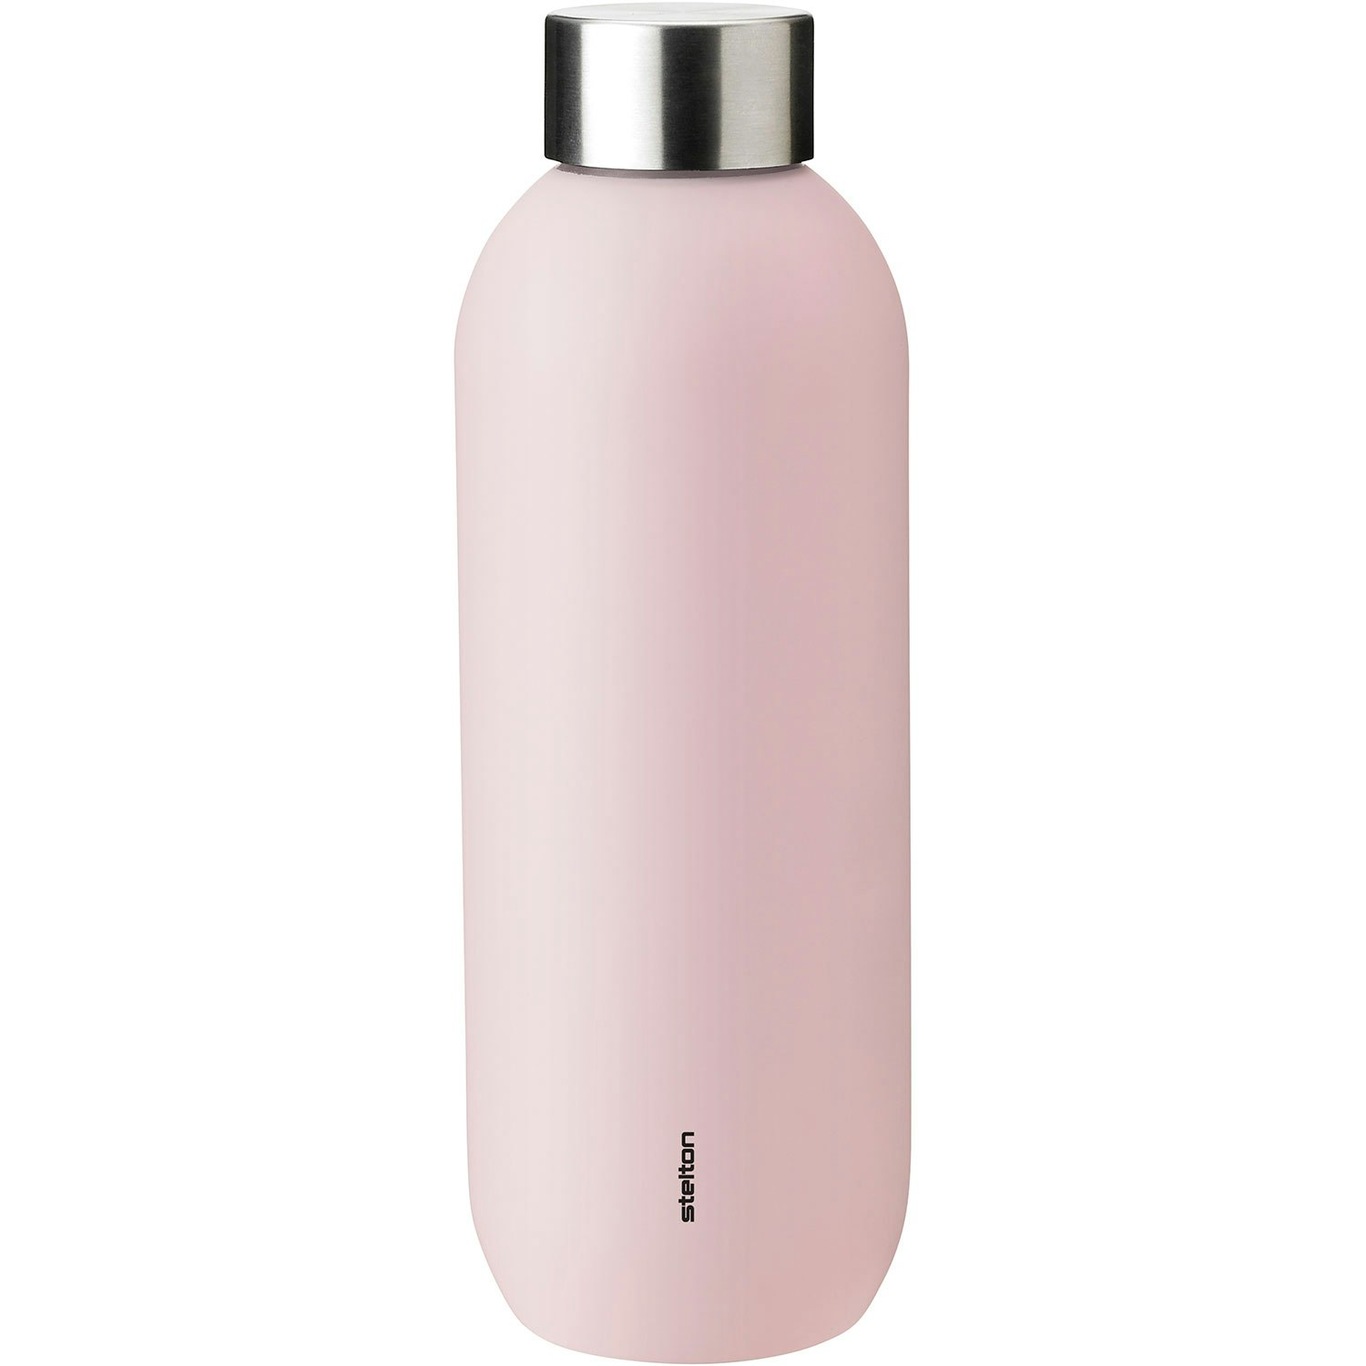 https://royaldesign.com/image/2/stelton-keep-cool-thermo-drinking-bottle-60-cl-41?w=800&quality=80